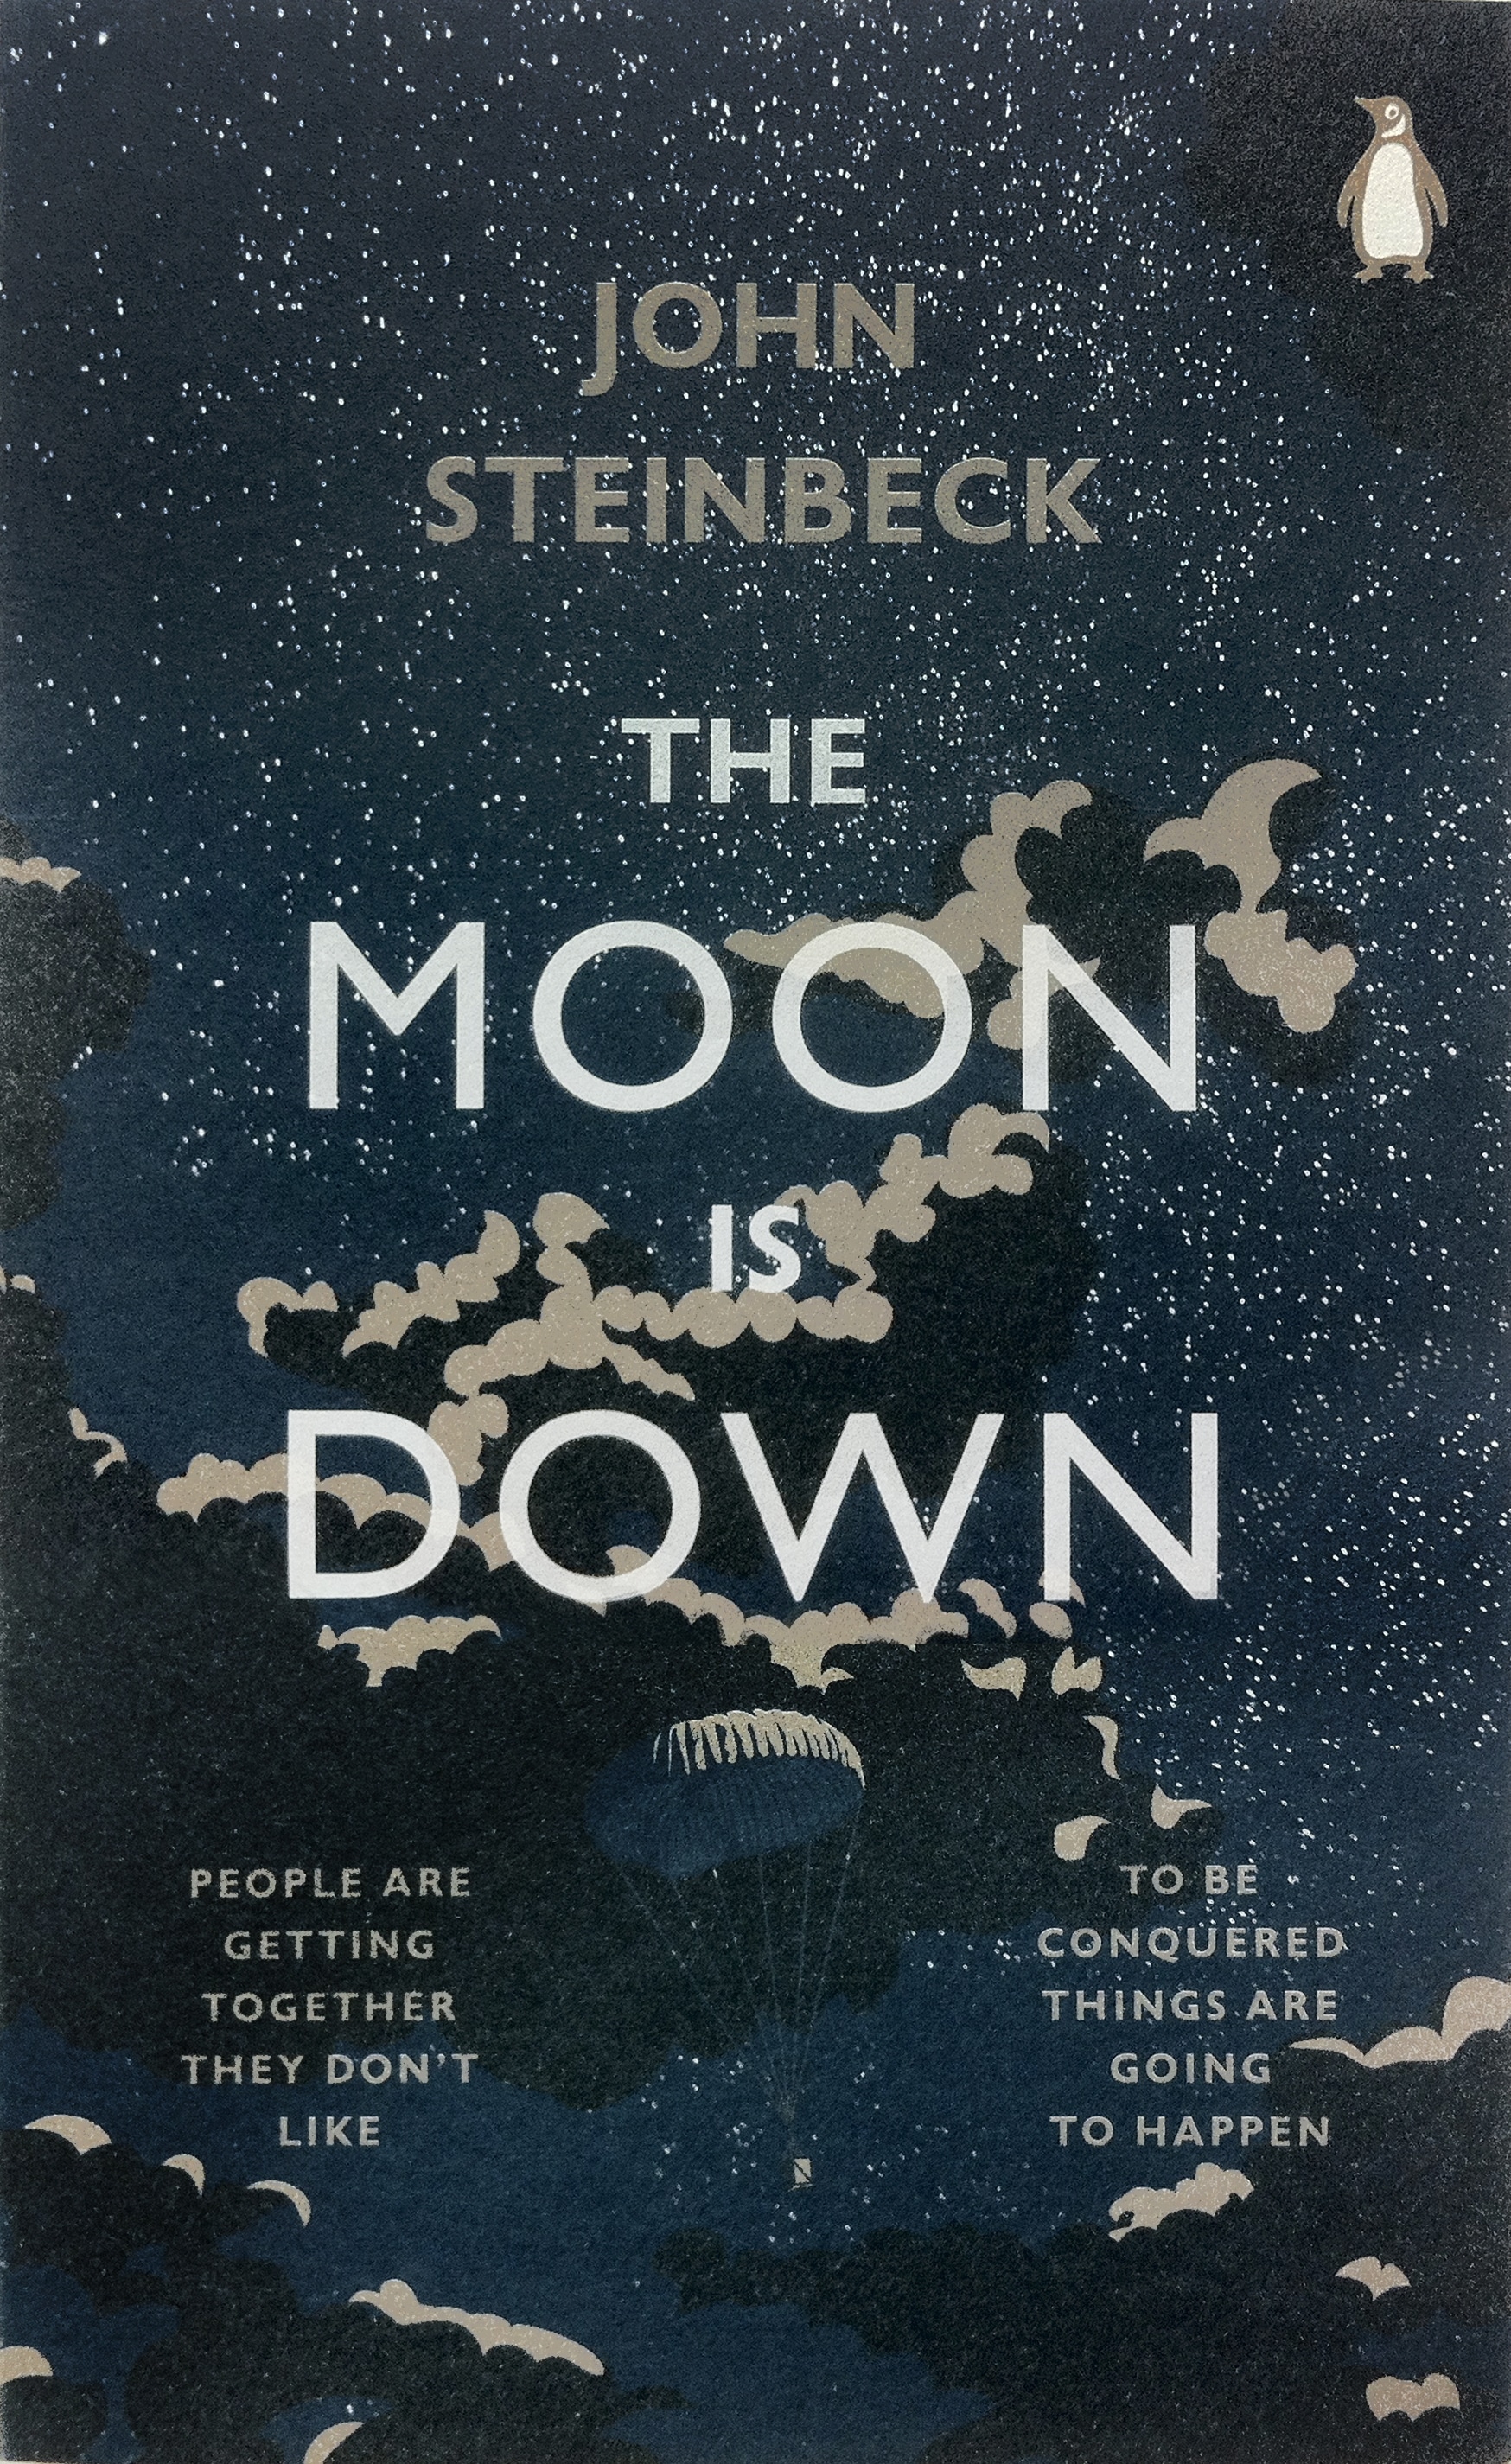 Book “The Moon is Down” by John Steinbeck, Donald Coers — April 3, 2014